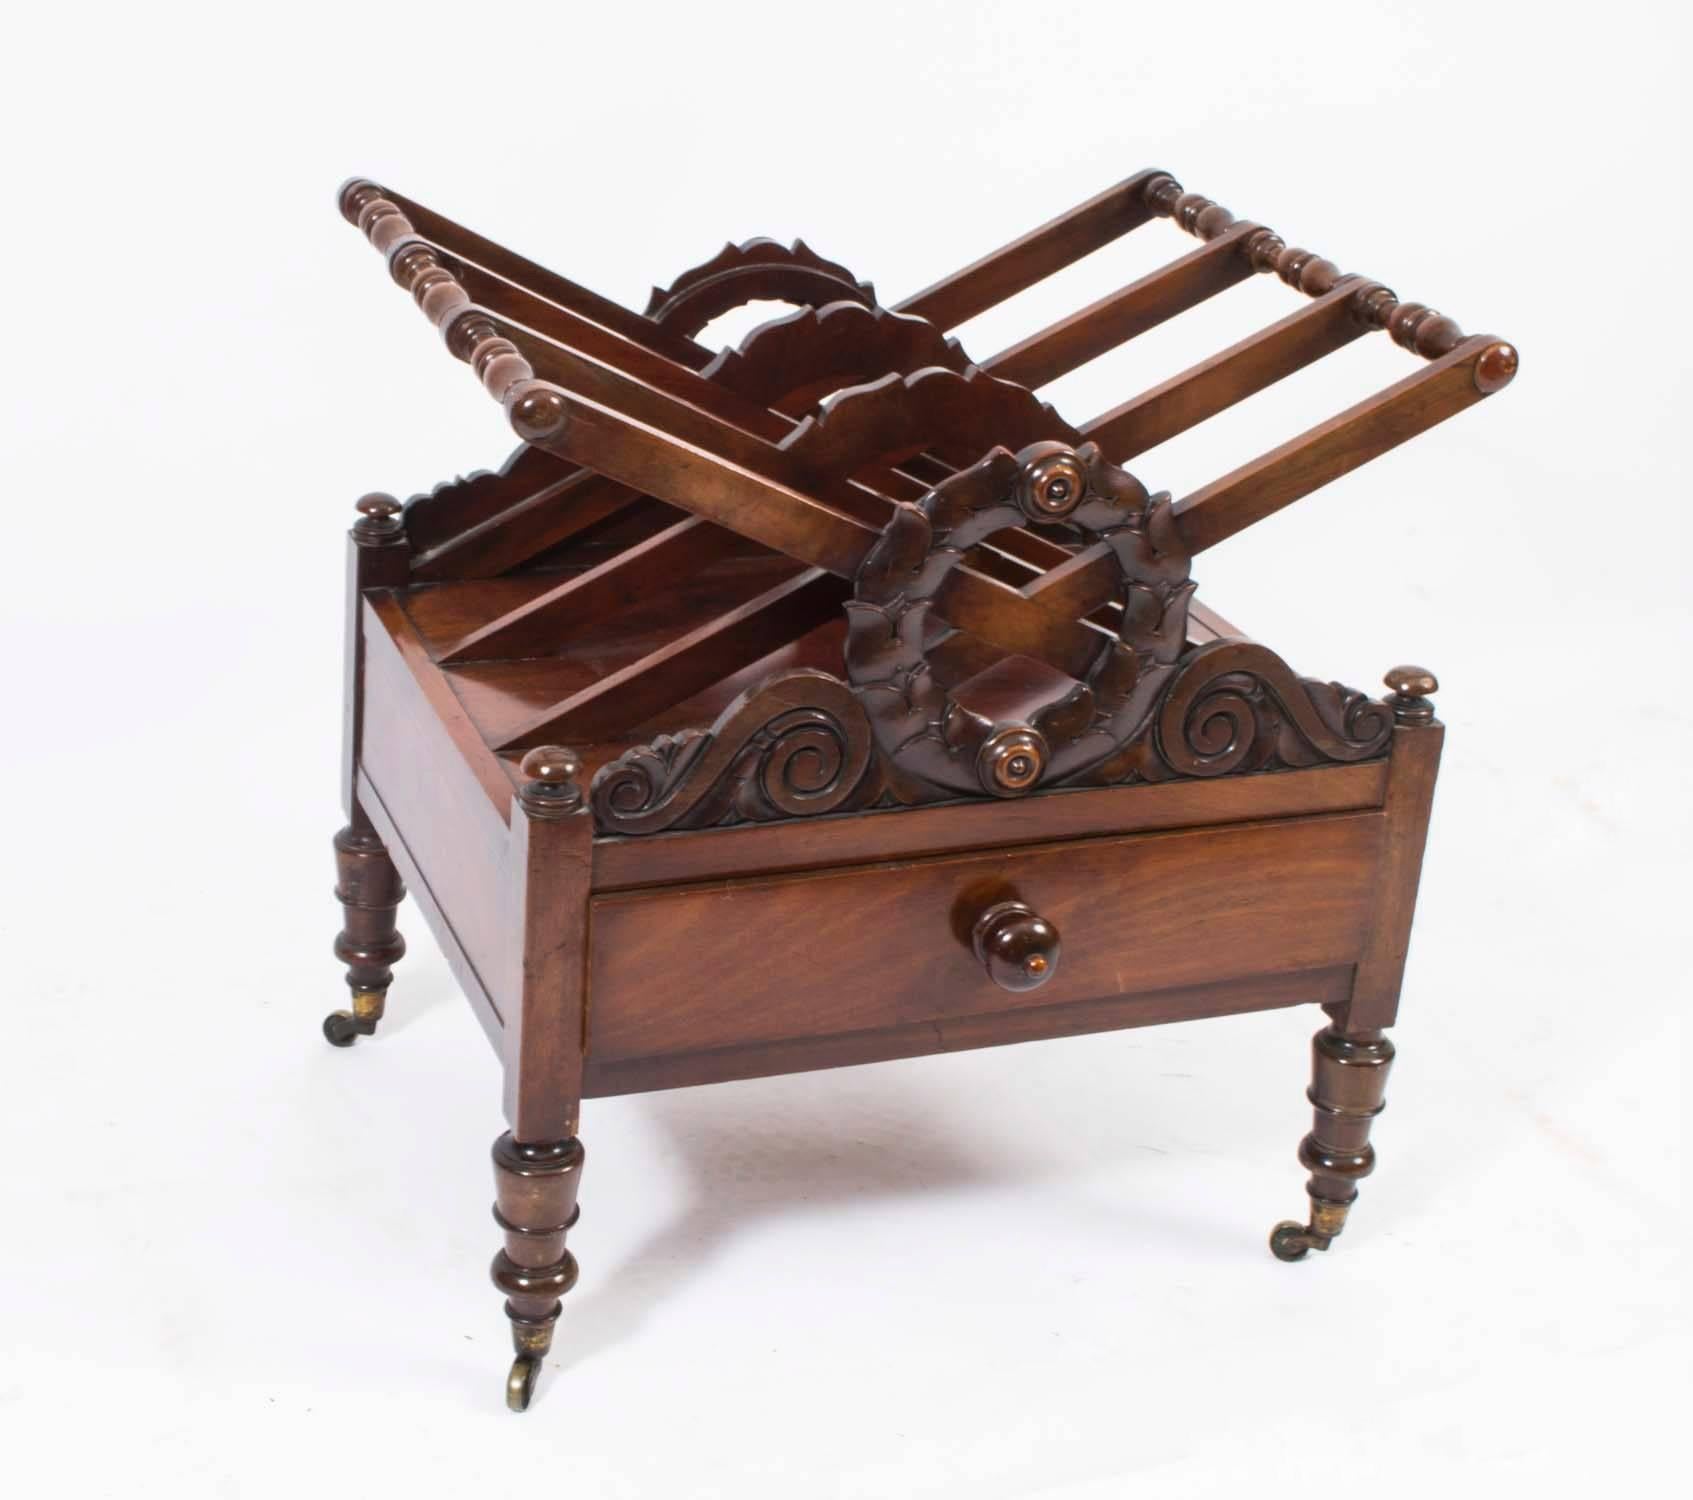 This is a gorgeous antique Regency mahogany Canterbury, circa 1820 in date.

The three sections are perfect for storing magazines and newspapers. It is beautifully decorated with carved floral scrolling ends above a useful drawer and it is elegantly